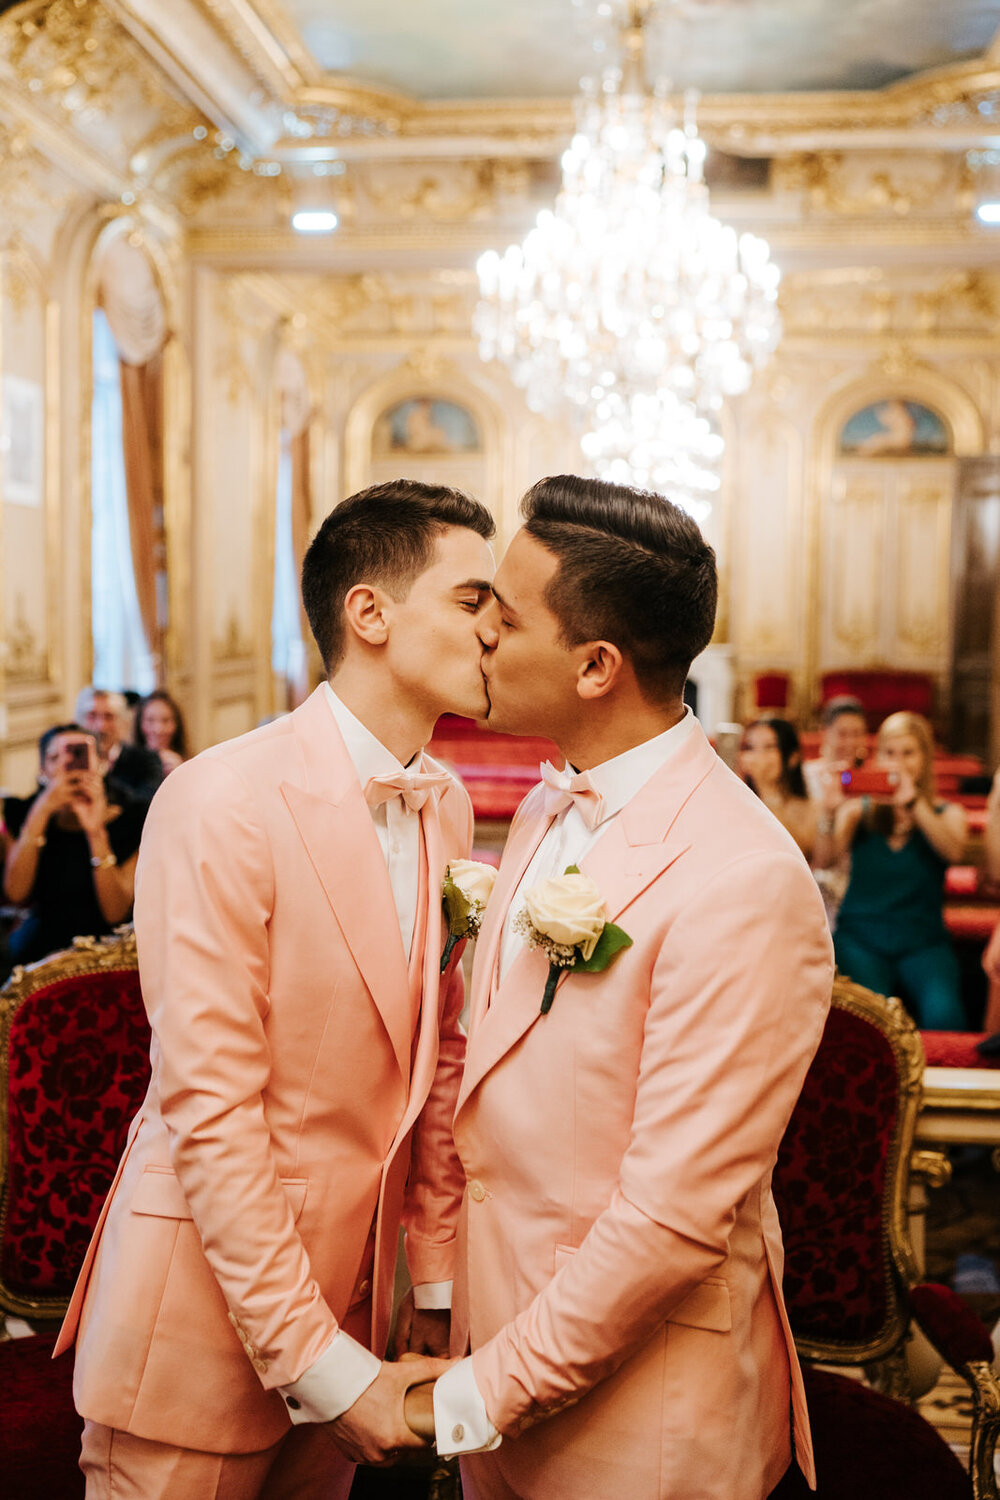 Two grooms wear pink tuxedos and have their first kiss in civil ceremony in Paris